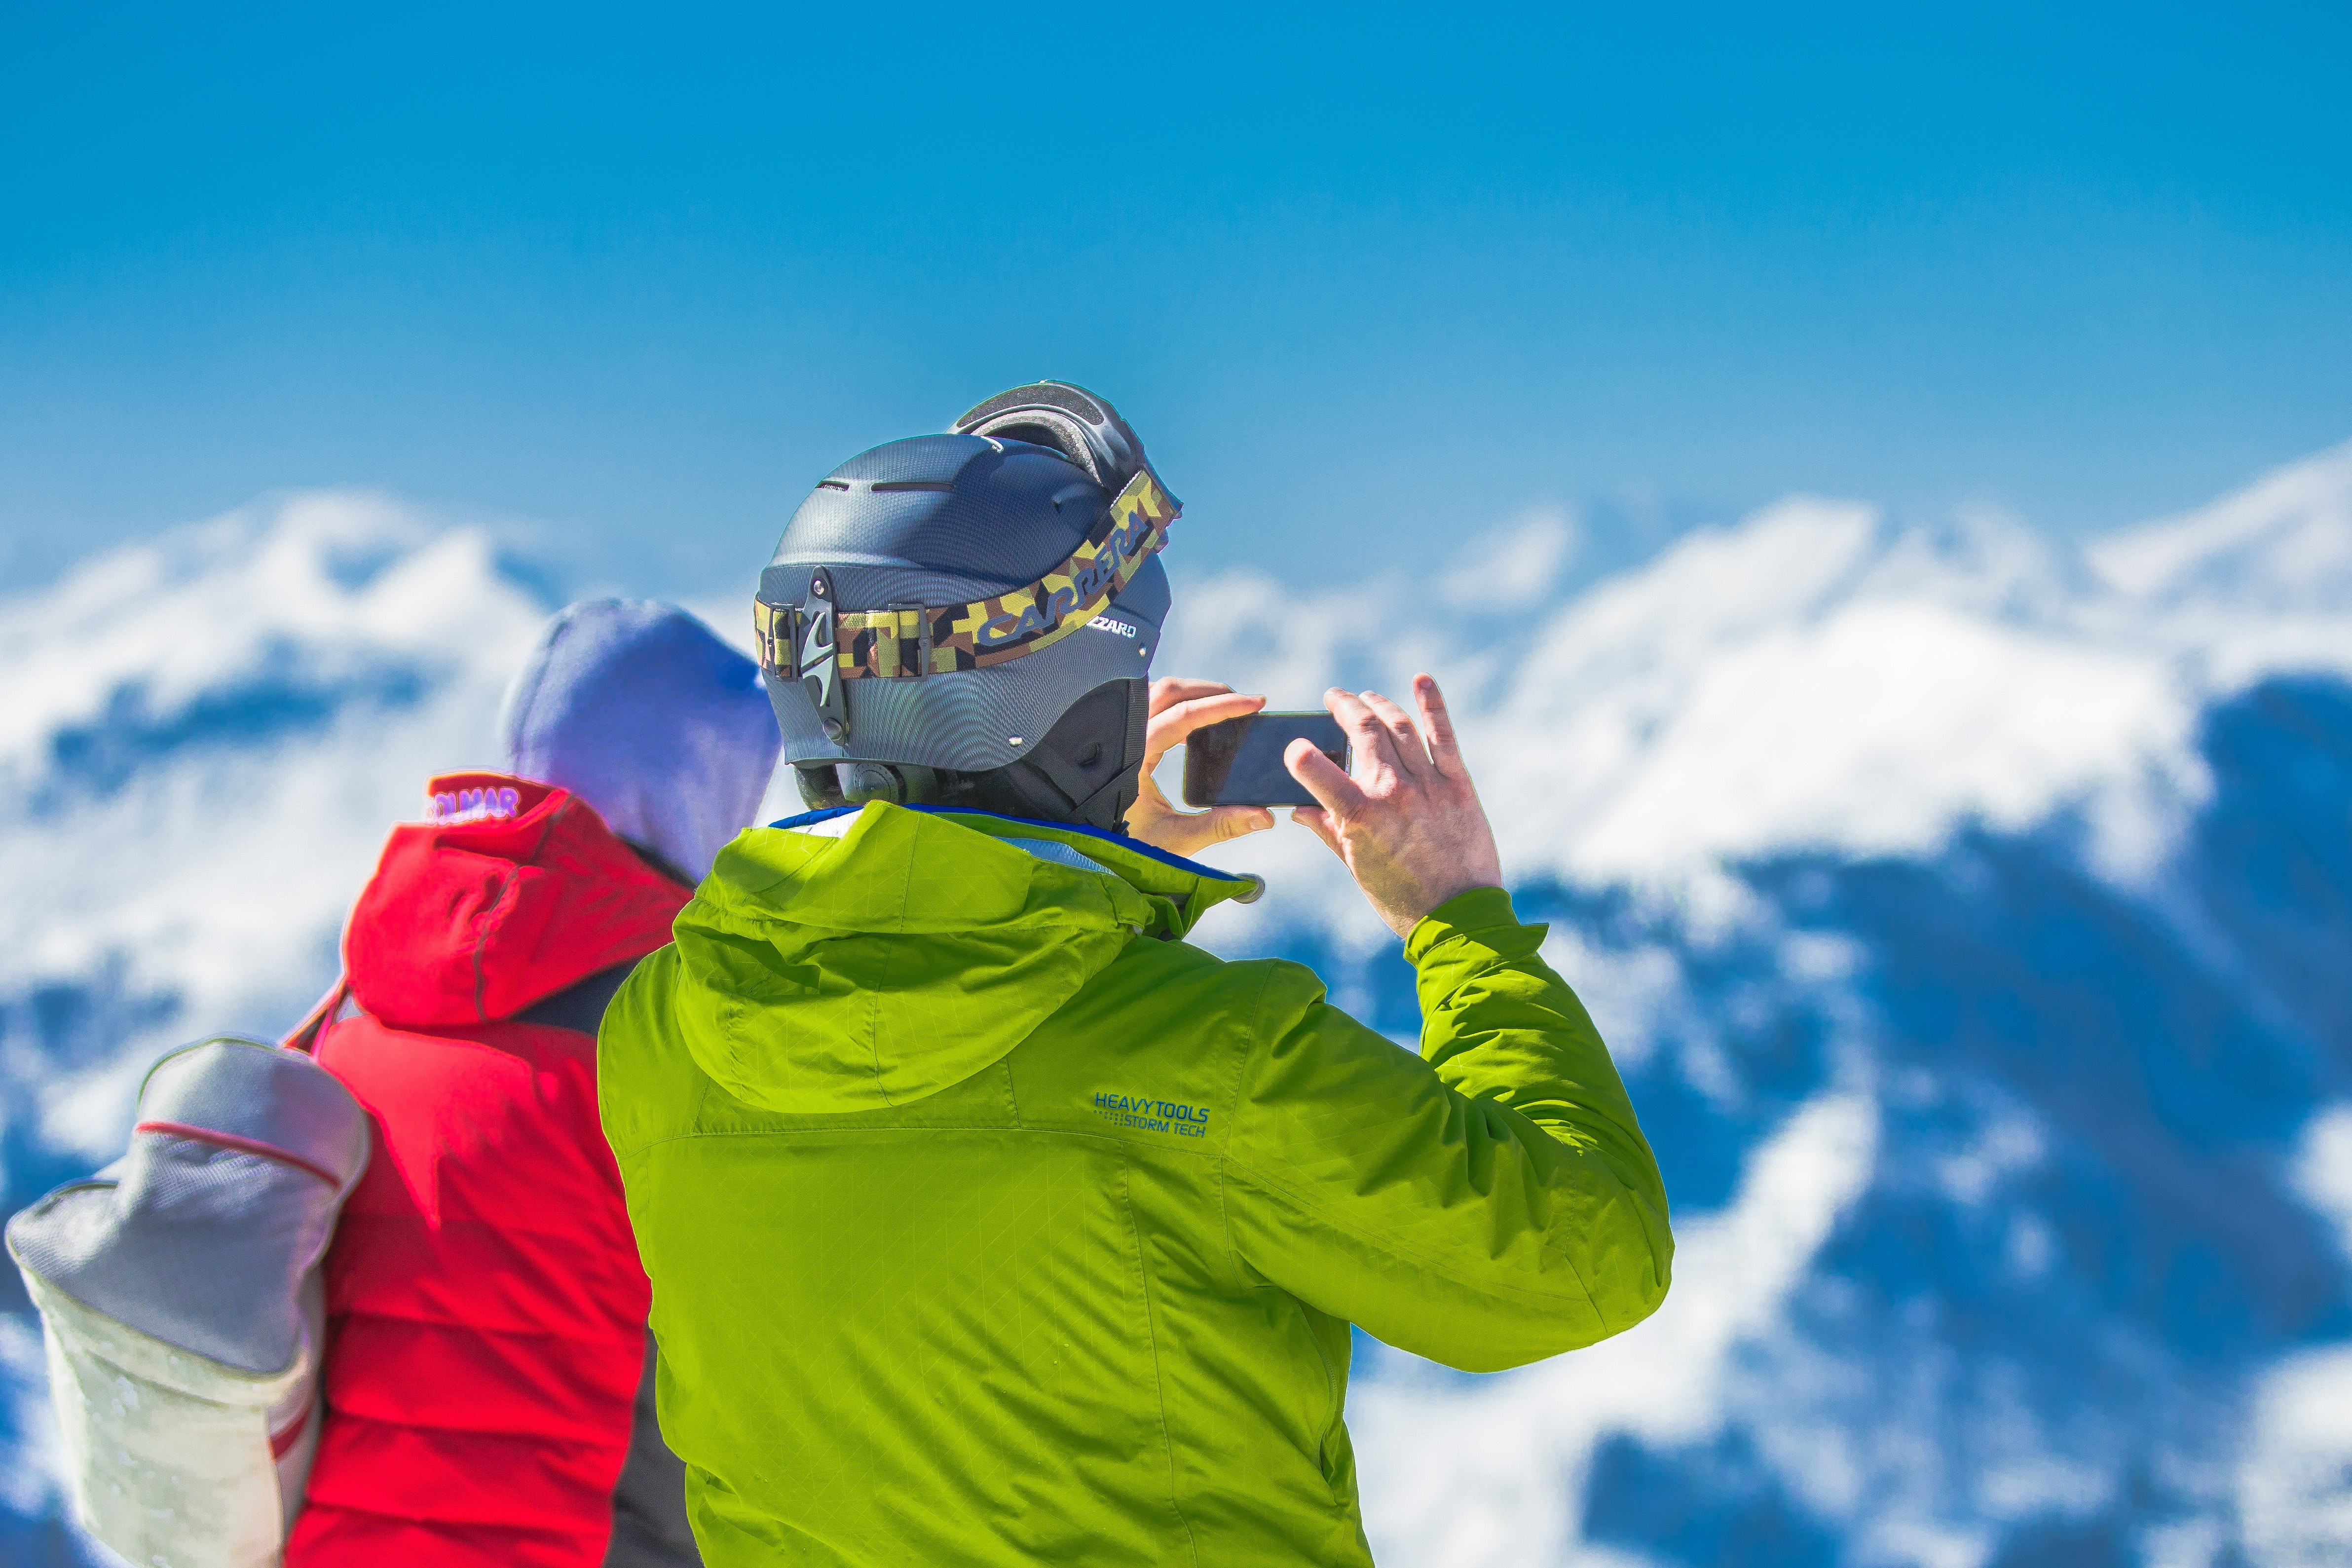 Man in Green Jacket and Gray Helmet Holding Phone Standing Next to Person in Red and Black Jacket, Active, People, View, Vacation, HQ Photo